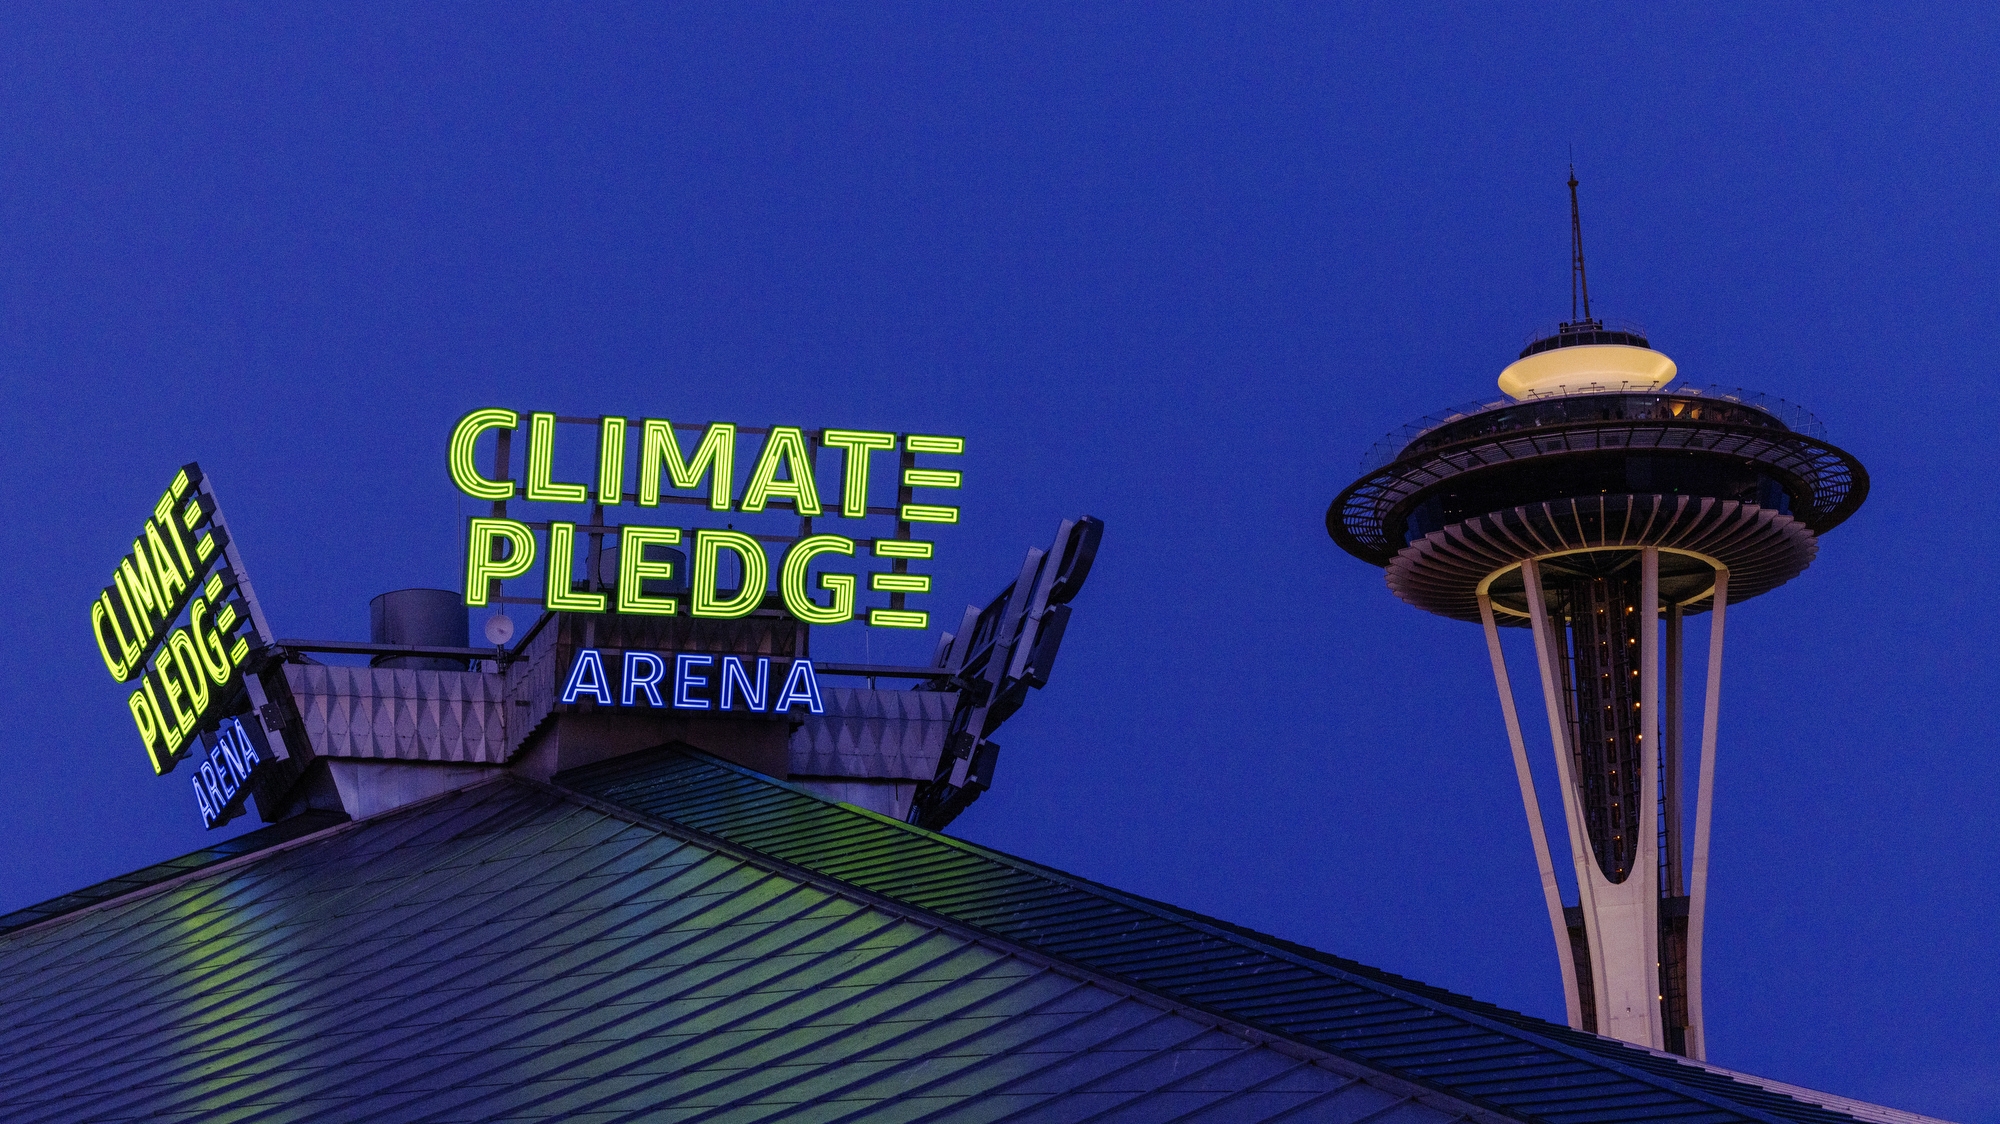 An image of the top of Climate Pledge Arena in Seattle at night. There is the illuminated neon sign that says "Climate Pledge Arena" on top of the stadium and the Space Needle in the background.